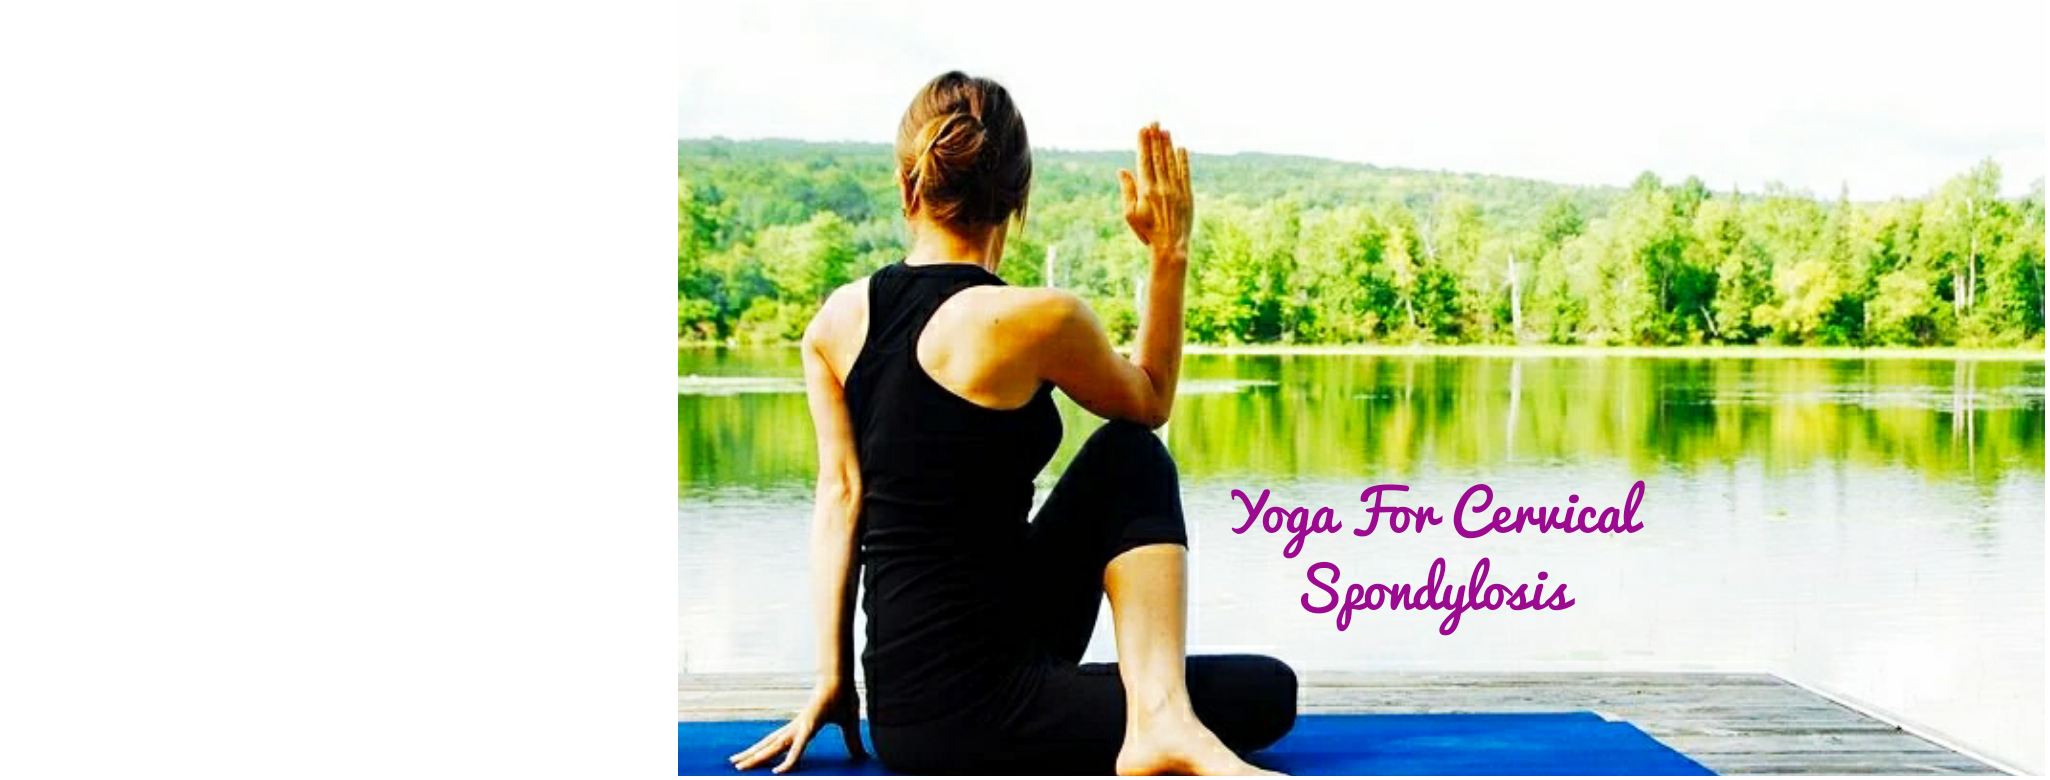 3 Ways Yoga Can Help With Back Pain | NJ Spine & Orthopedic